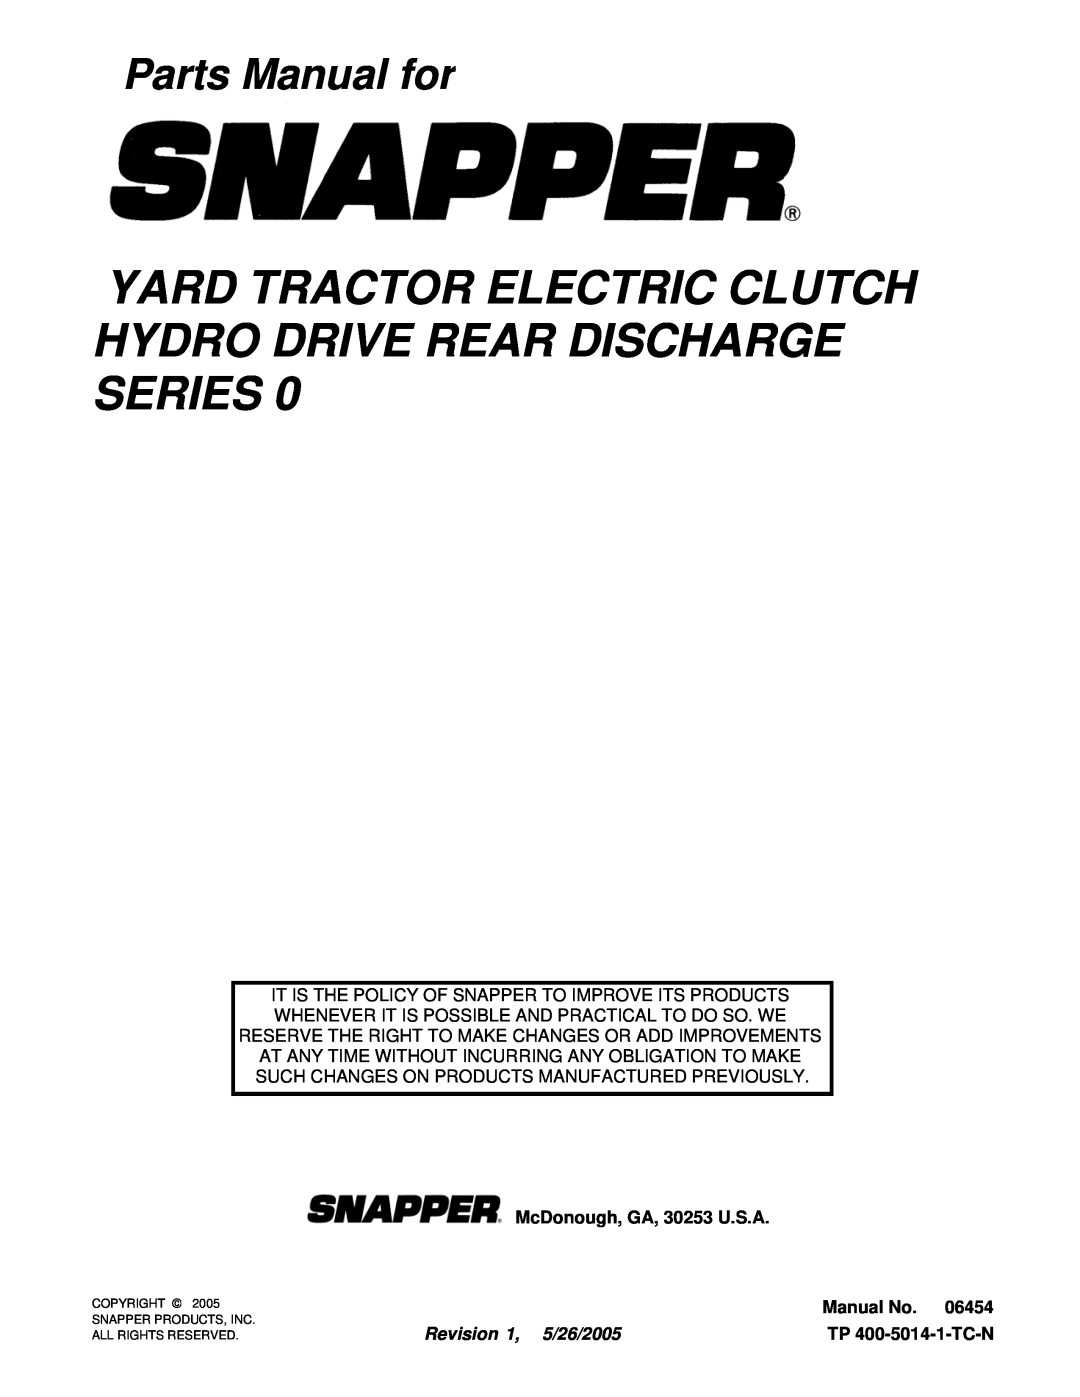 Snapper RD1740, RD1840, RD2040 Yard Tractor Electric Clutch Hydro Drive Rear Discharge Series, Parts Manual for, Manual No 